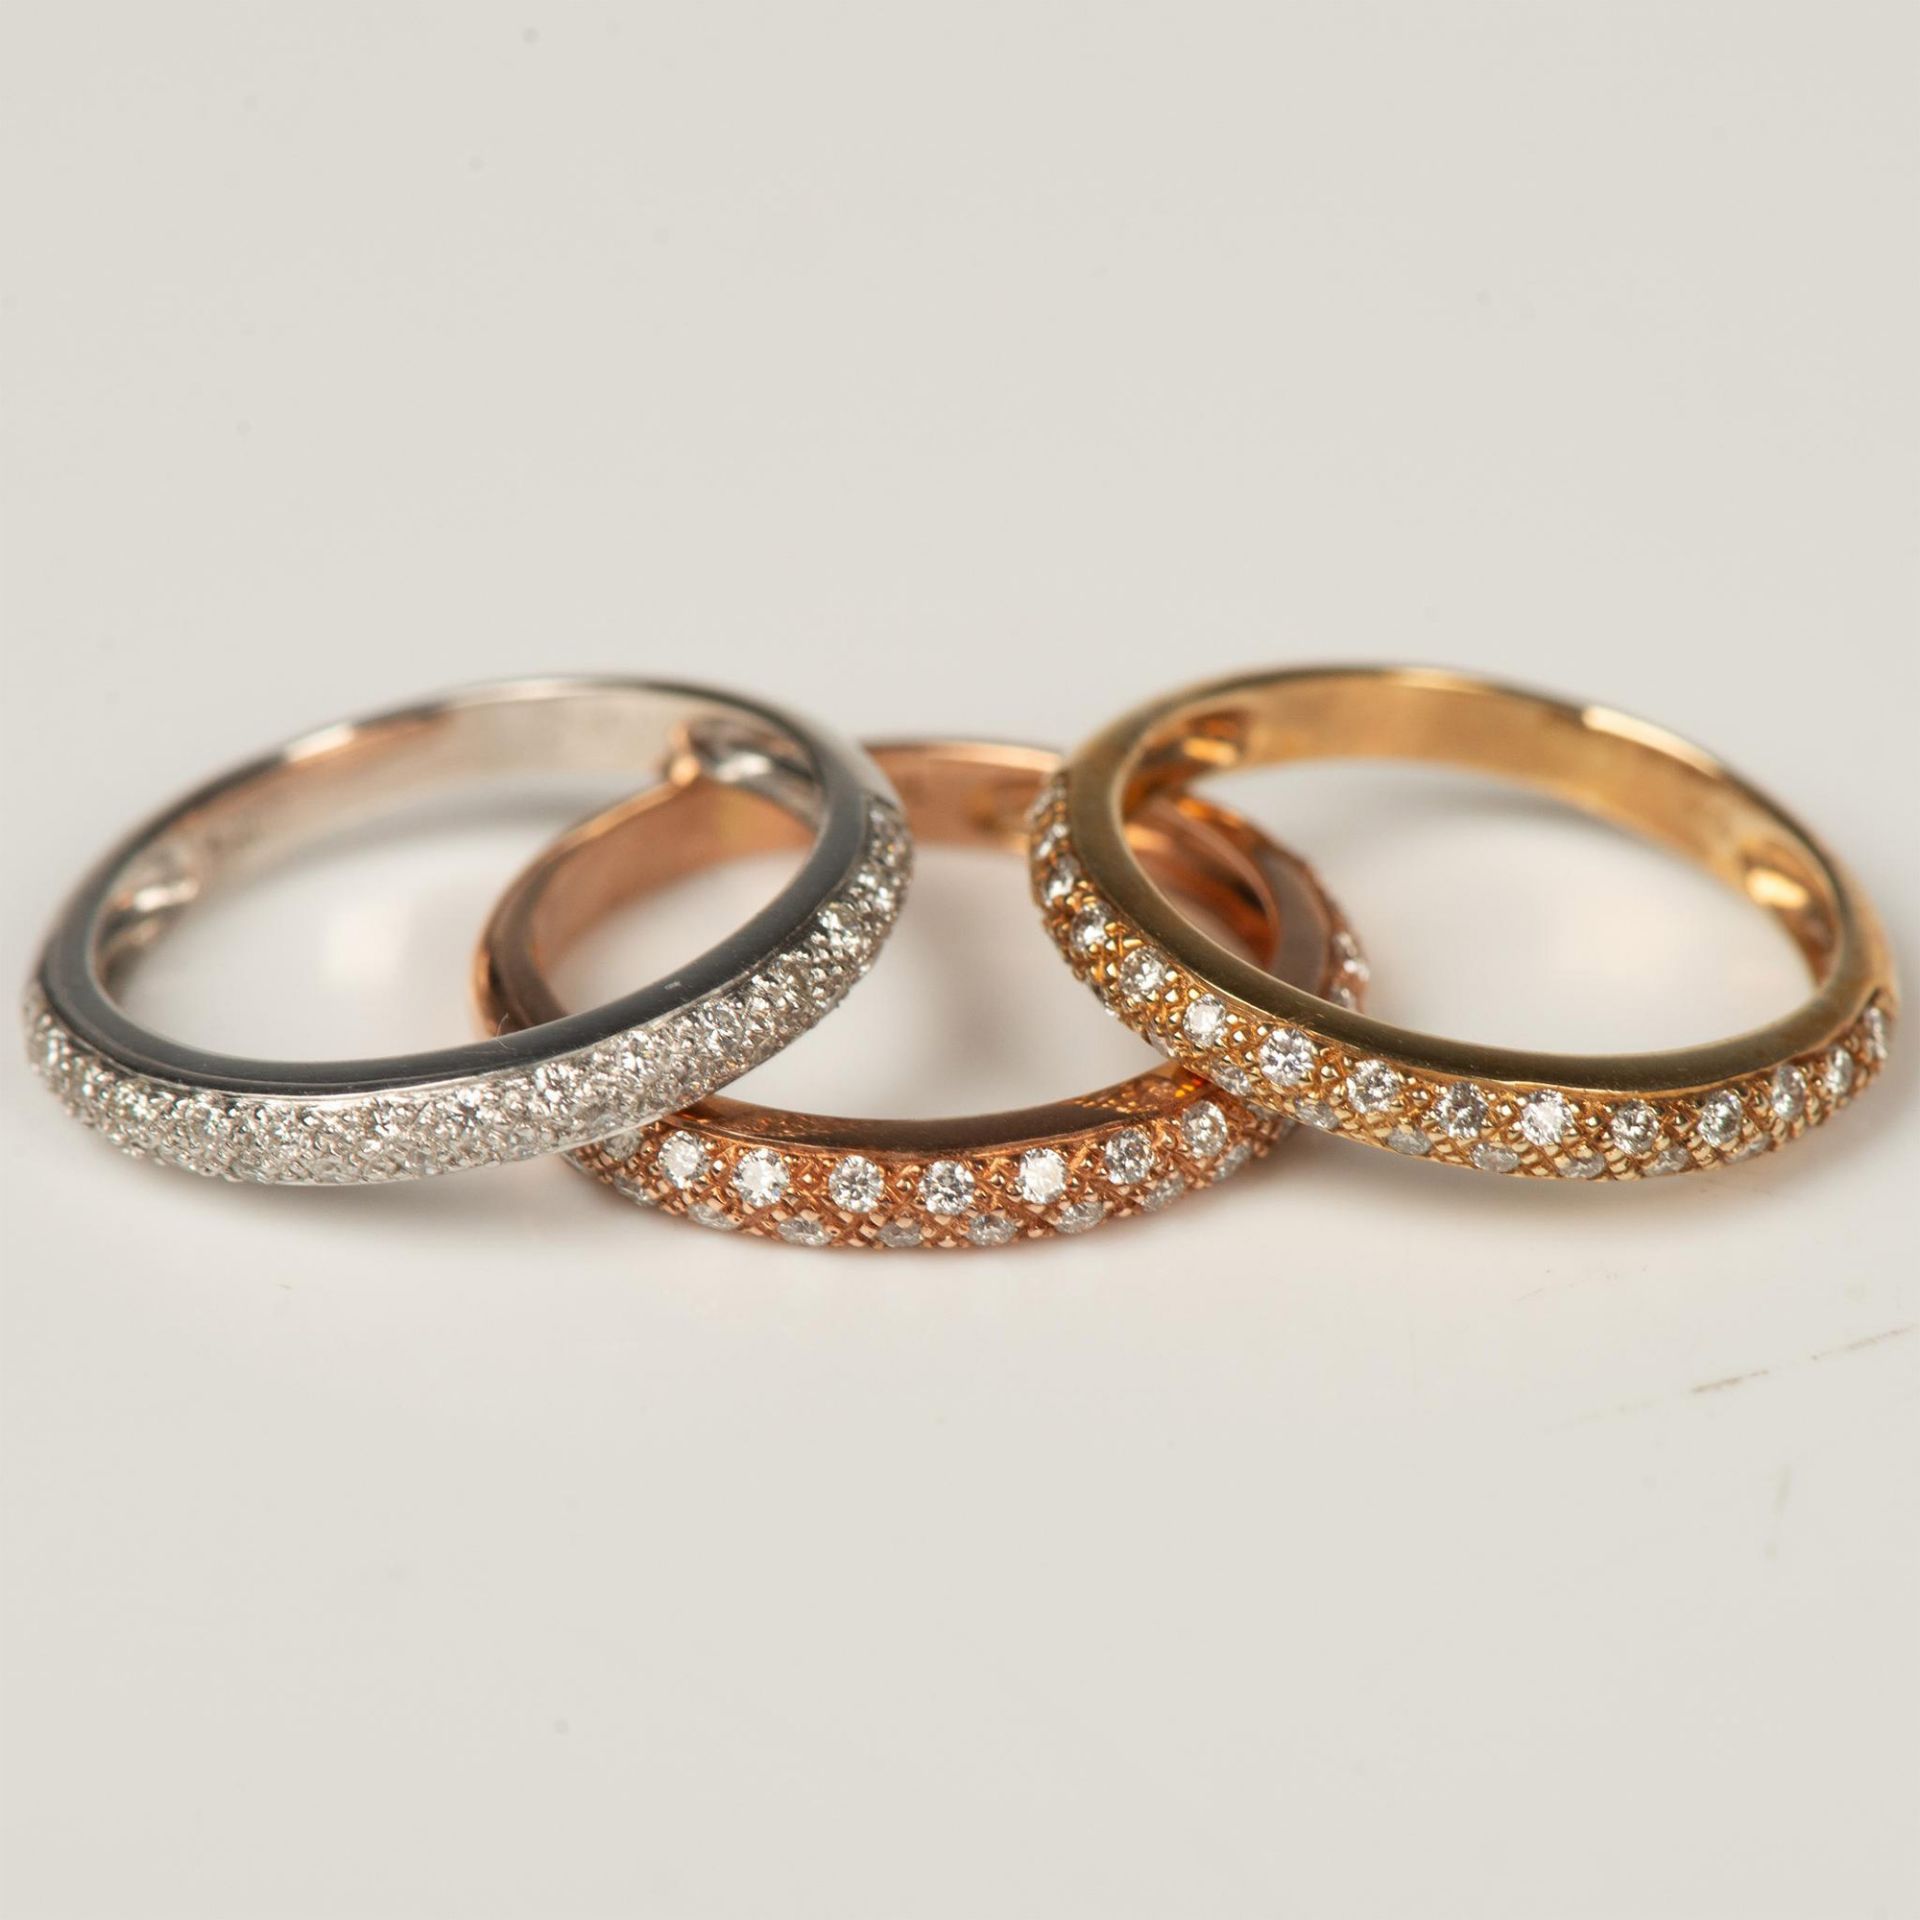 3pc Oro 14K Tri-Color Diamond Stackable Rings - Image 4 of 8